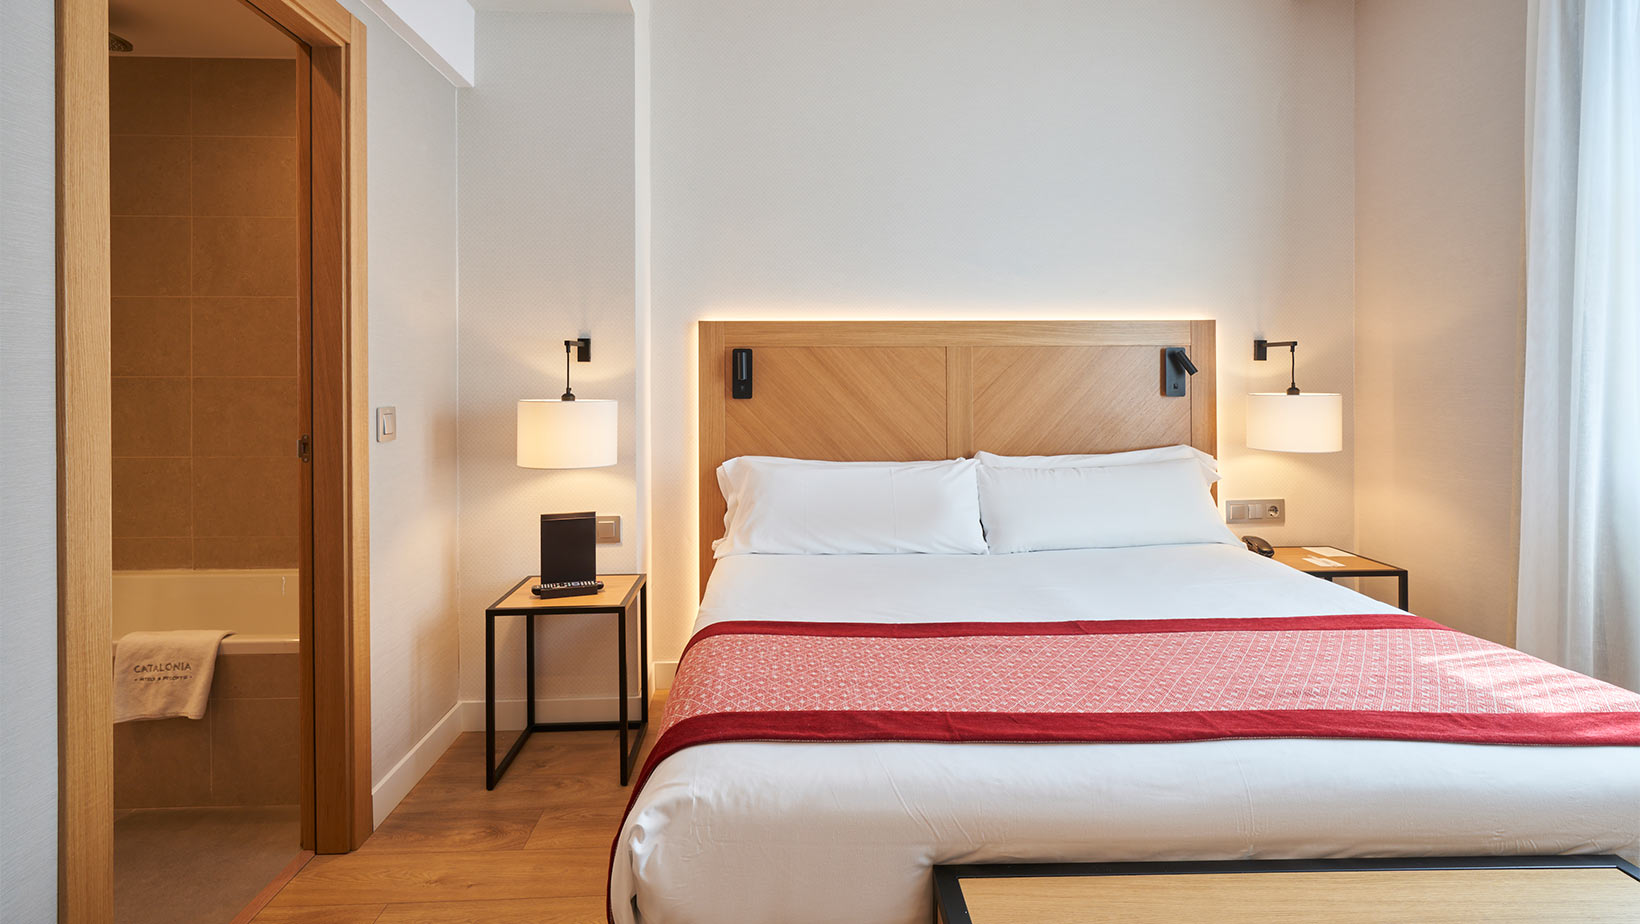 Hotel Catalonia Passeig de Gracia Review: What To REALLY Expect If You Stay